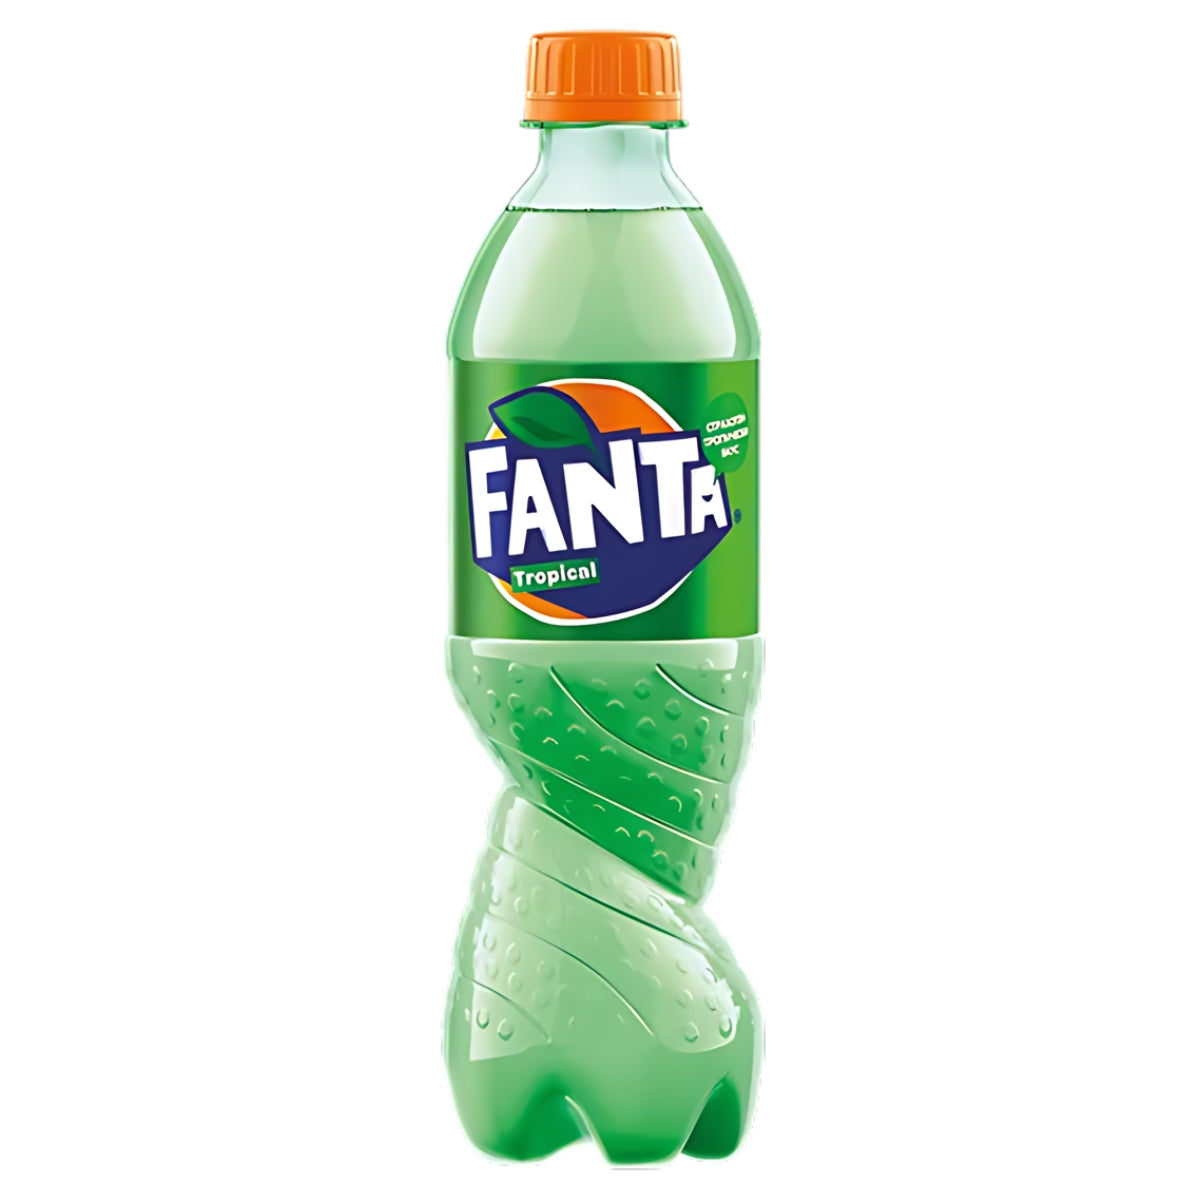 A green plastic bottle of Fanta - Tropical Bottle (Bulgaria) - 500ml with an orange cap and a label featuring the Fanta logo, showcasing a refreshing carbonated drink with a hint of citrus taste.